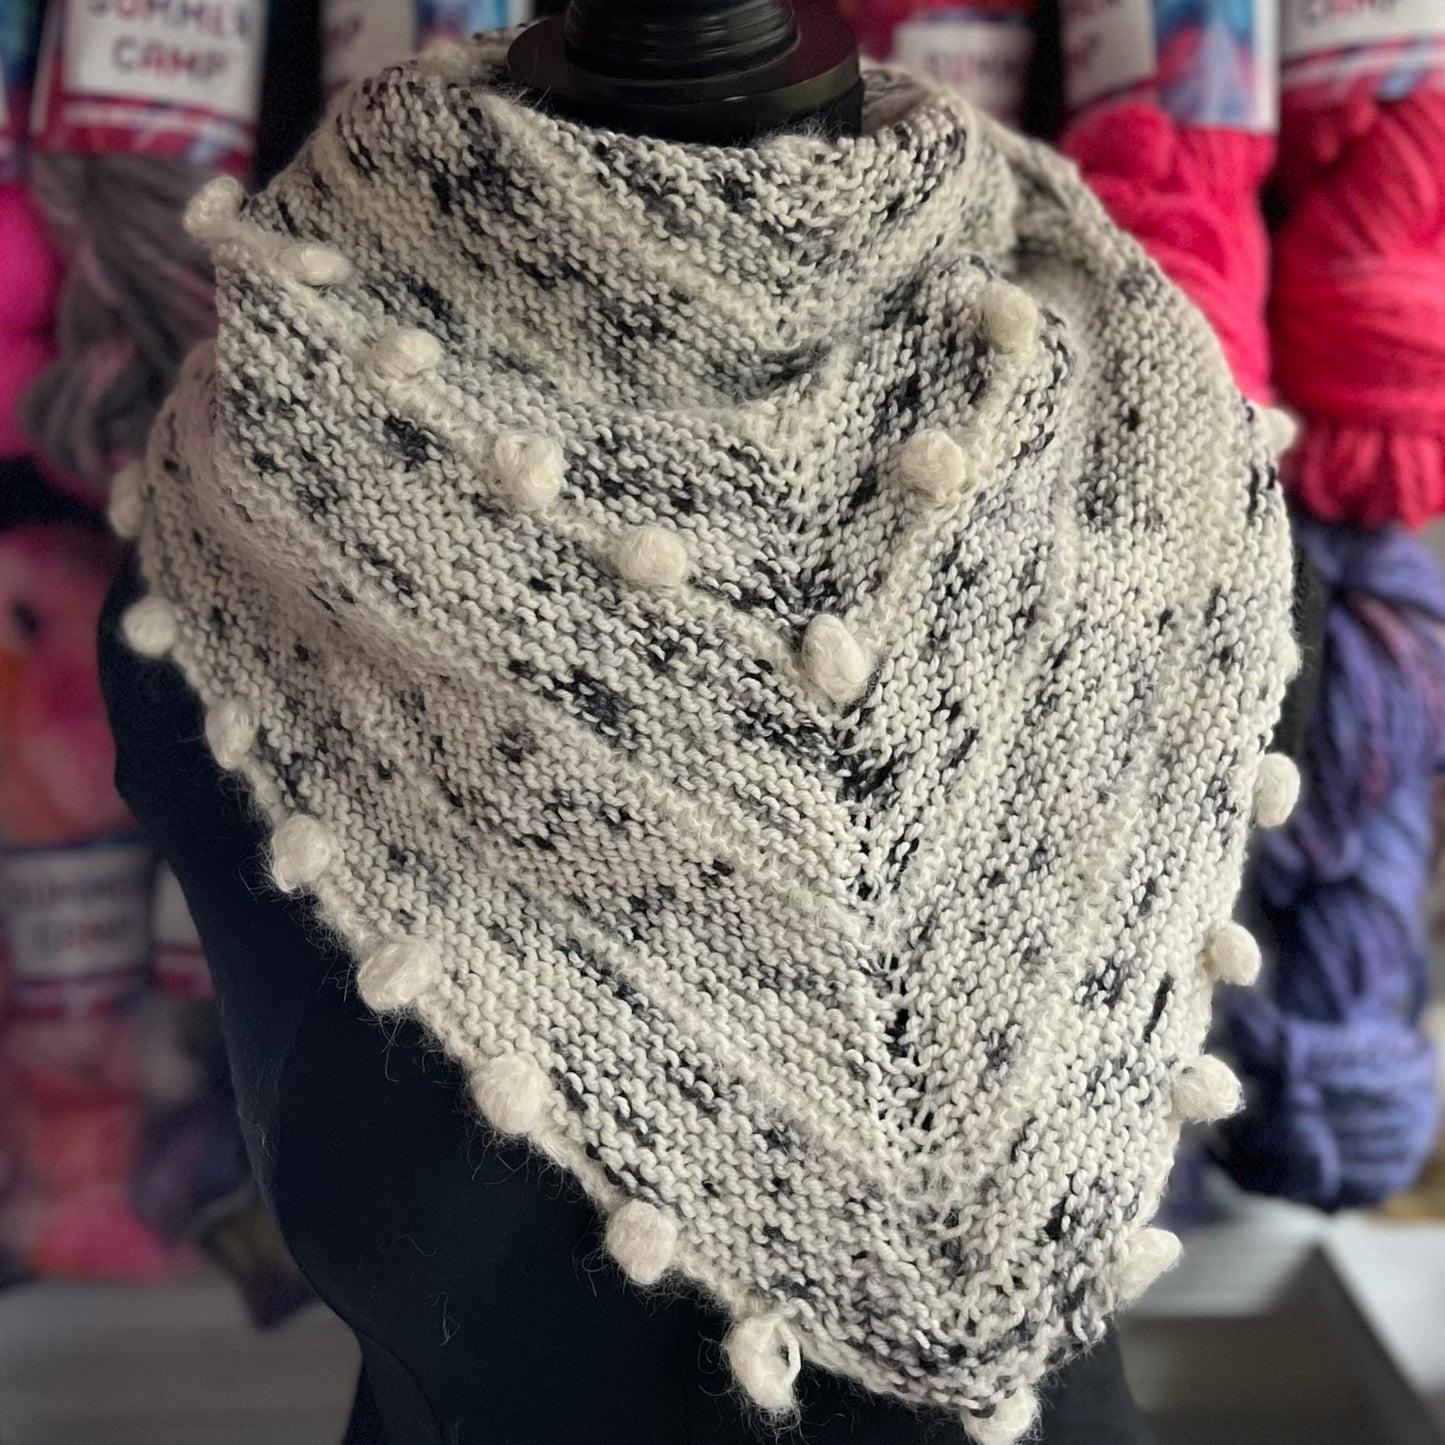 Discover Crochet: Scarf Kit – Berry – Friendly Loom